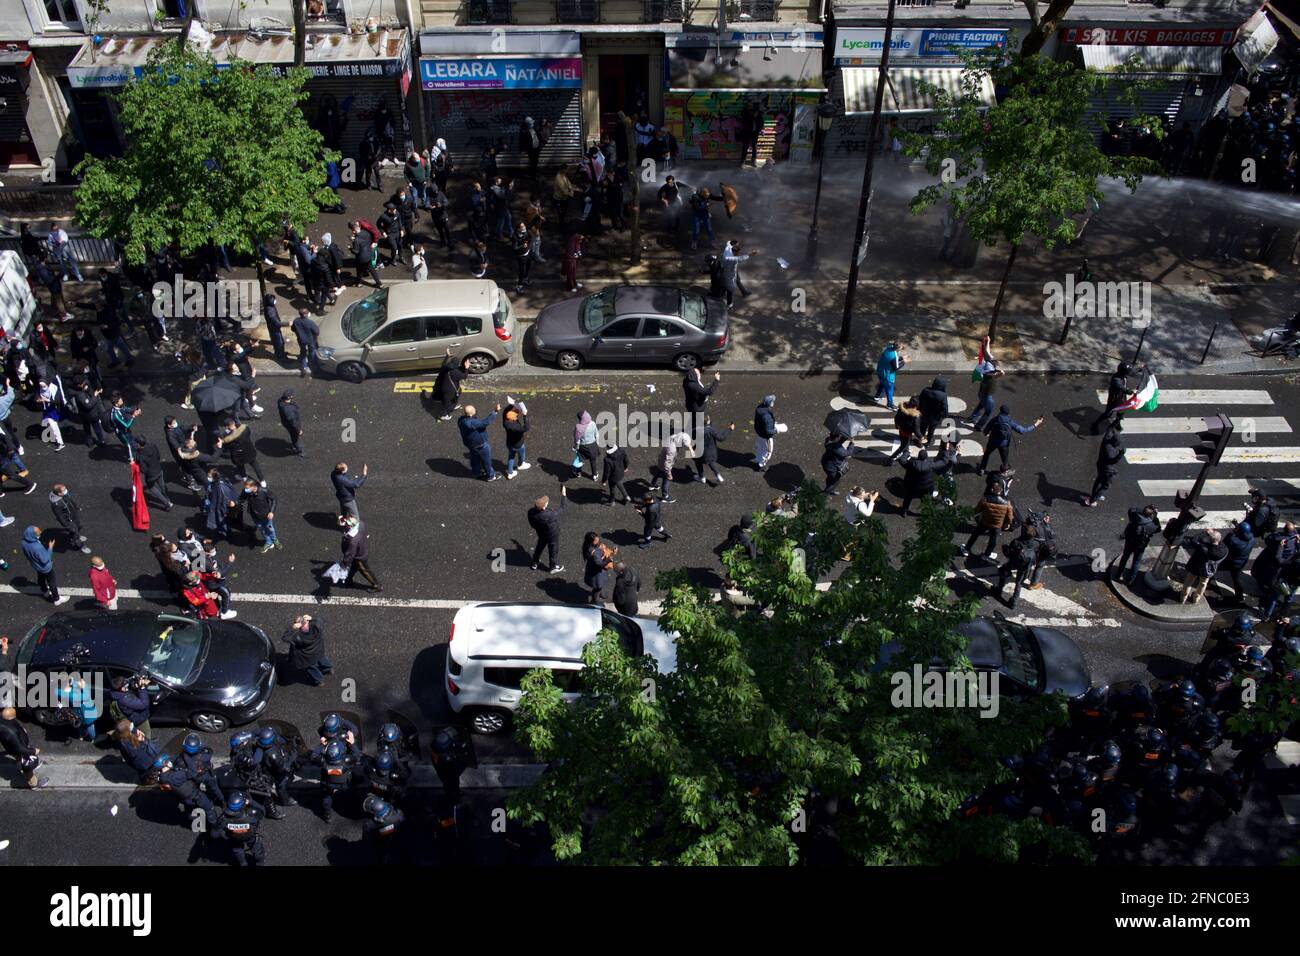 Police fire water cannon at pro-Palestinian supporters demonstrating in Paris. Boulevard Barbès, Paris, France, 15th May, 2021 Stock Photo